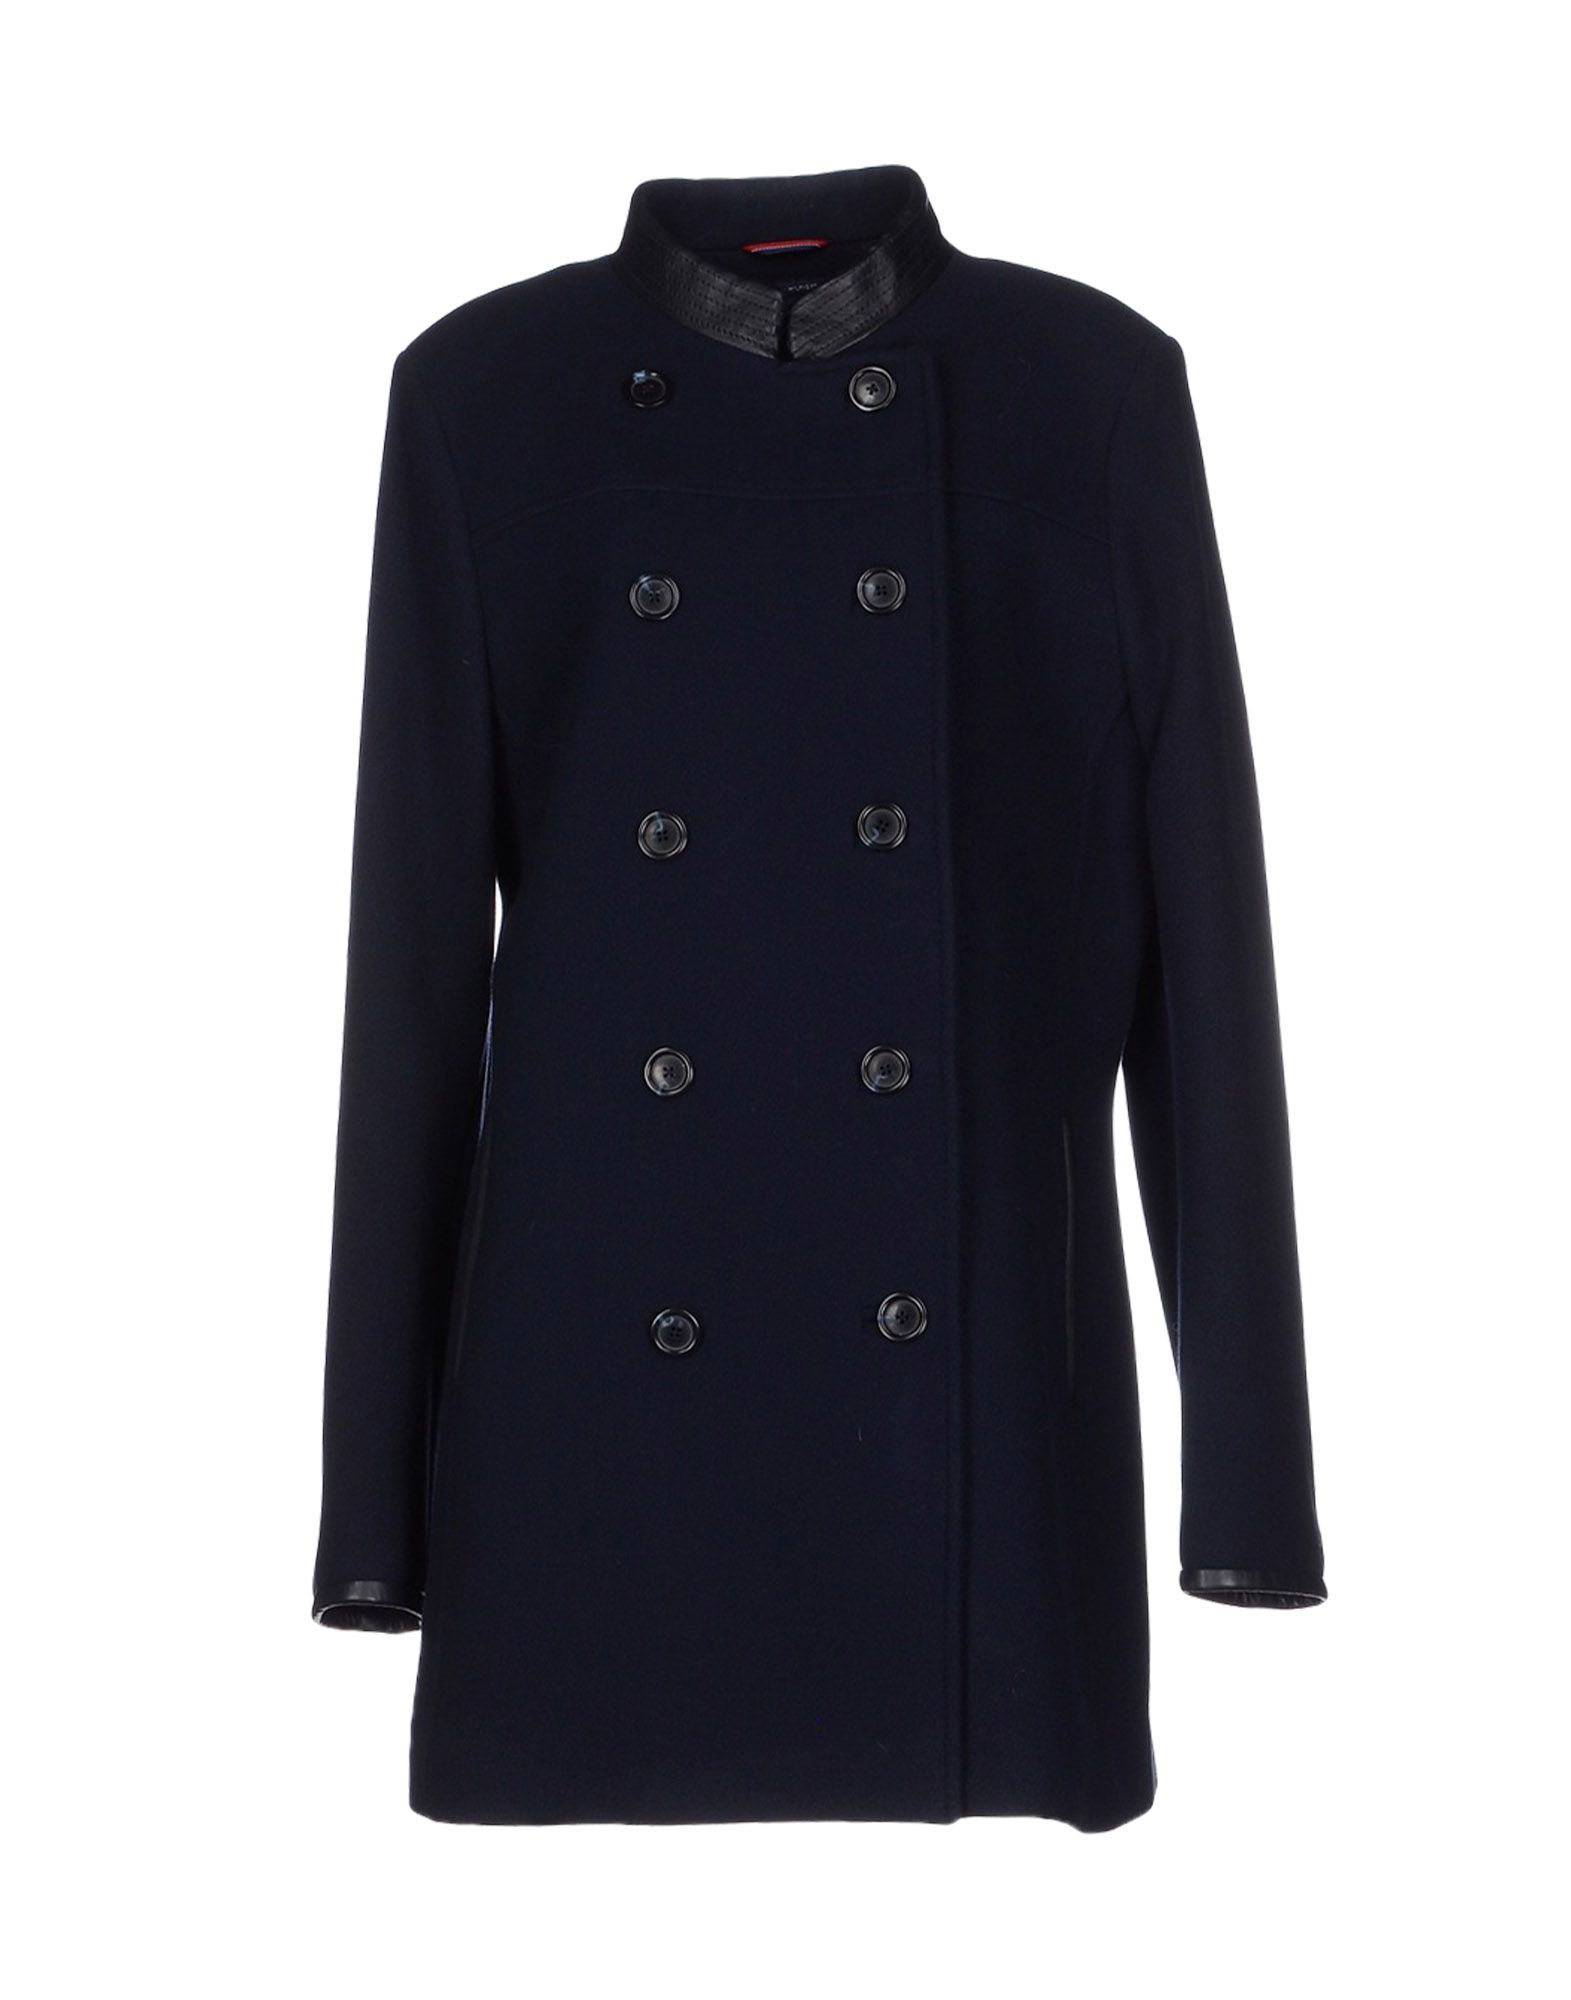 Lyst - Tommy Hilfiger Coat in Blue